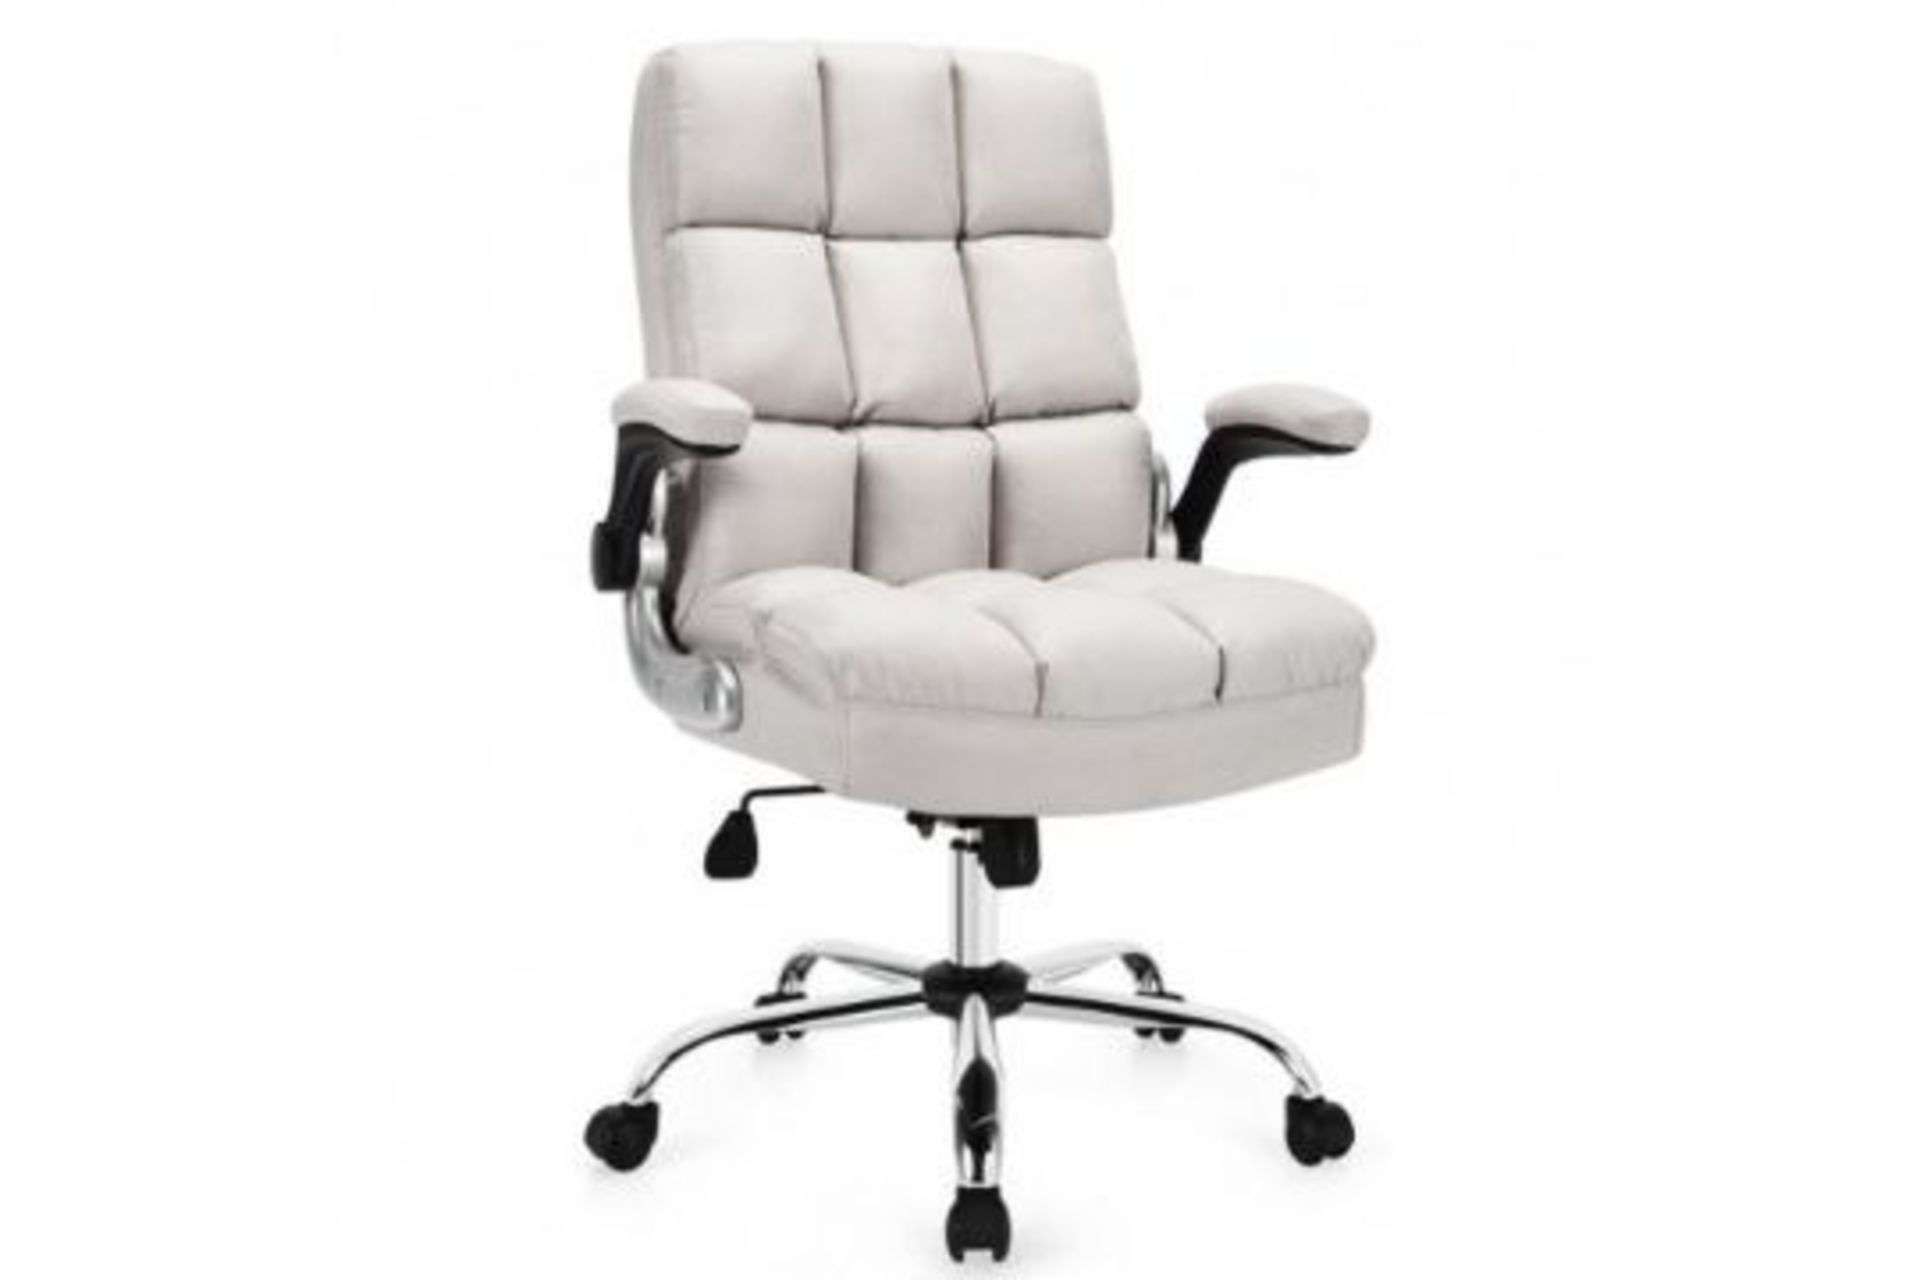 Adjustable Swivel Office Chair with High Back and Flip-up Arm for Home and Office. - ER24